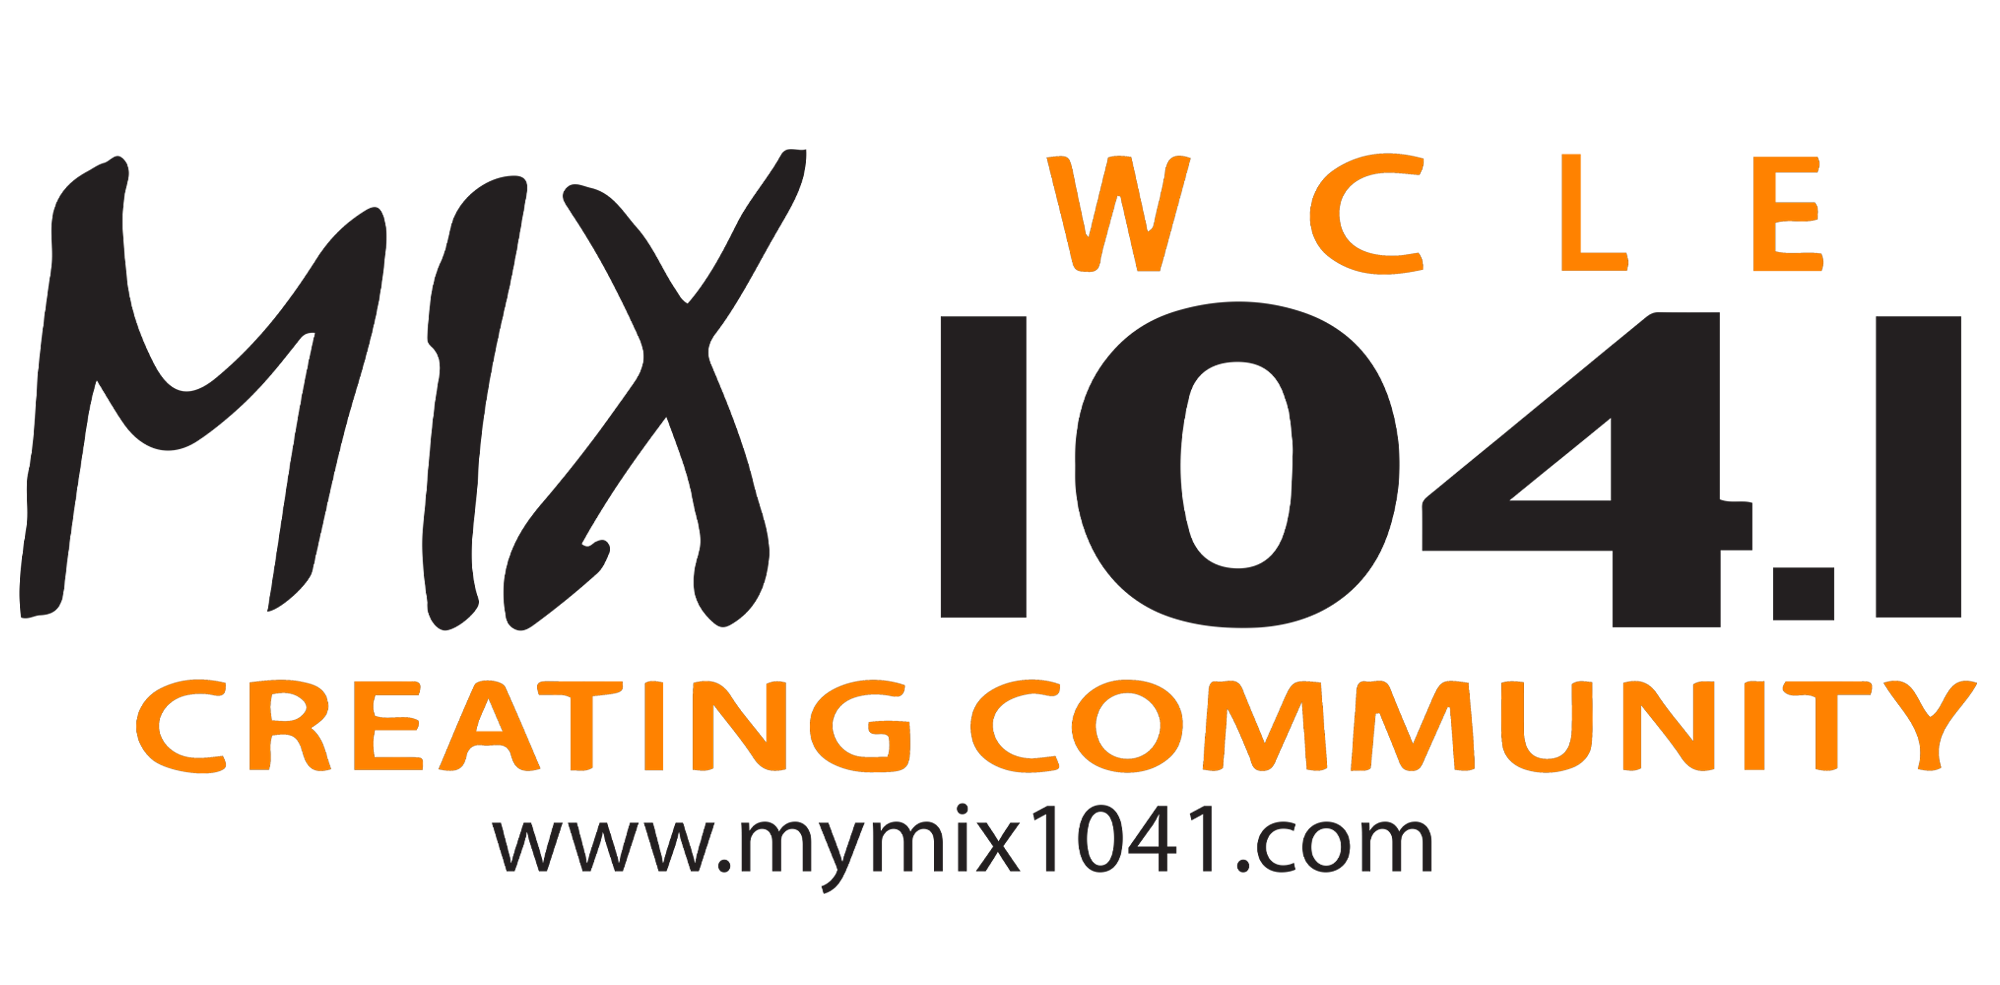 Mix 104.1 FM - WCLE - Cleveland, Tennessee - MixTV.tv